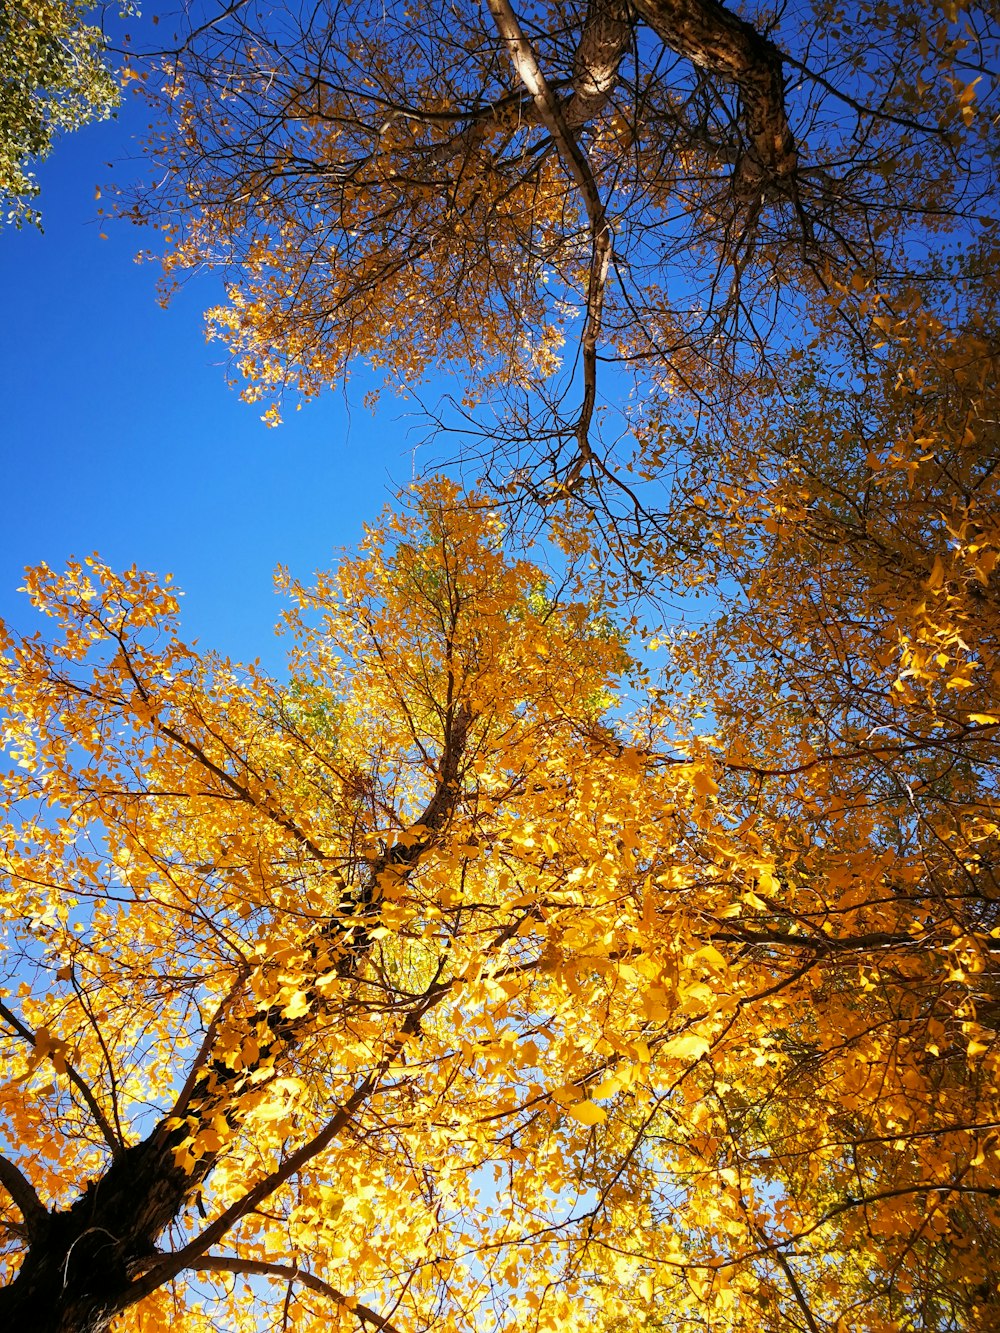 yellow colored leaf trees under blue skies